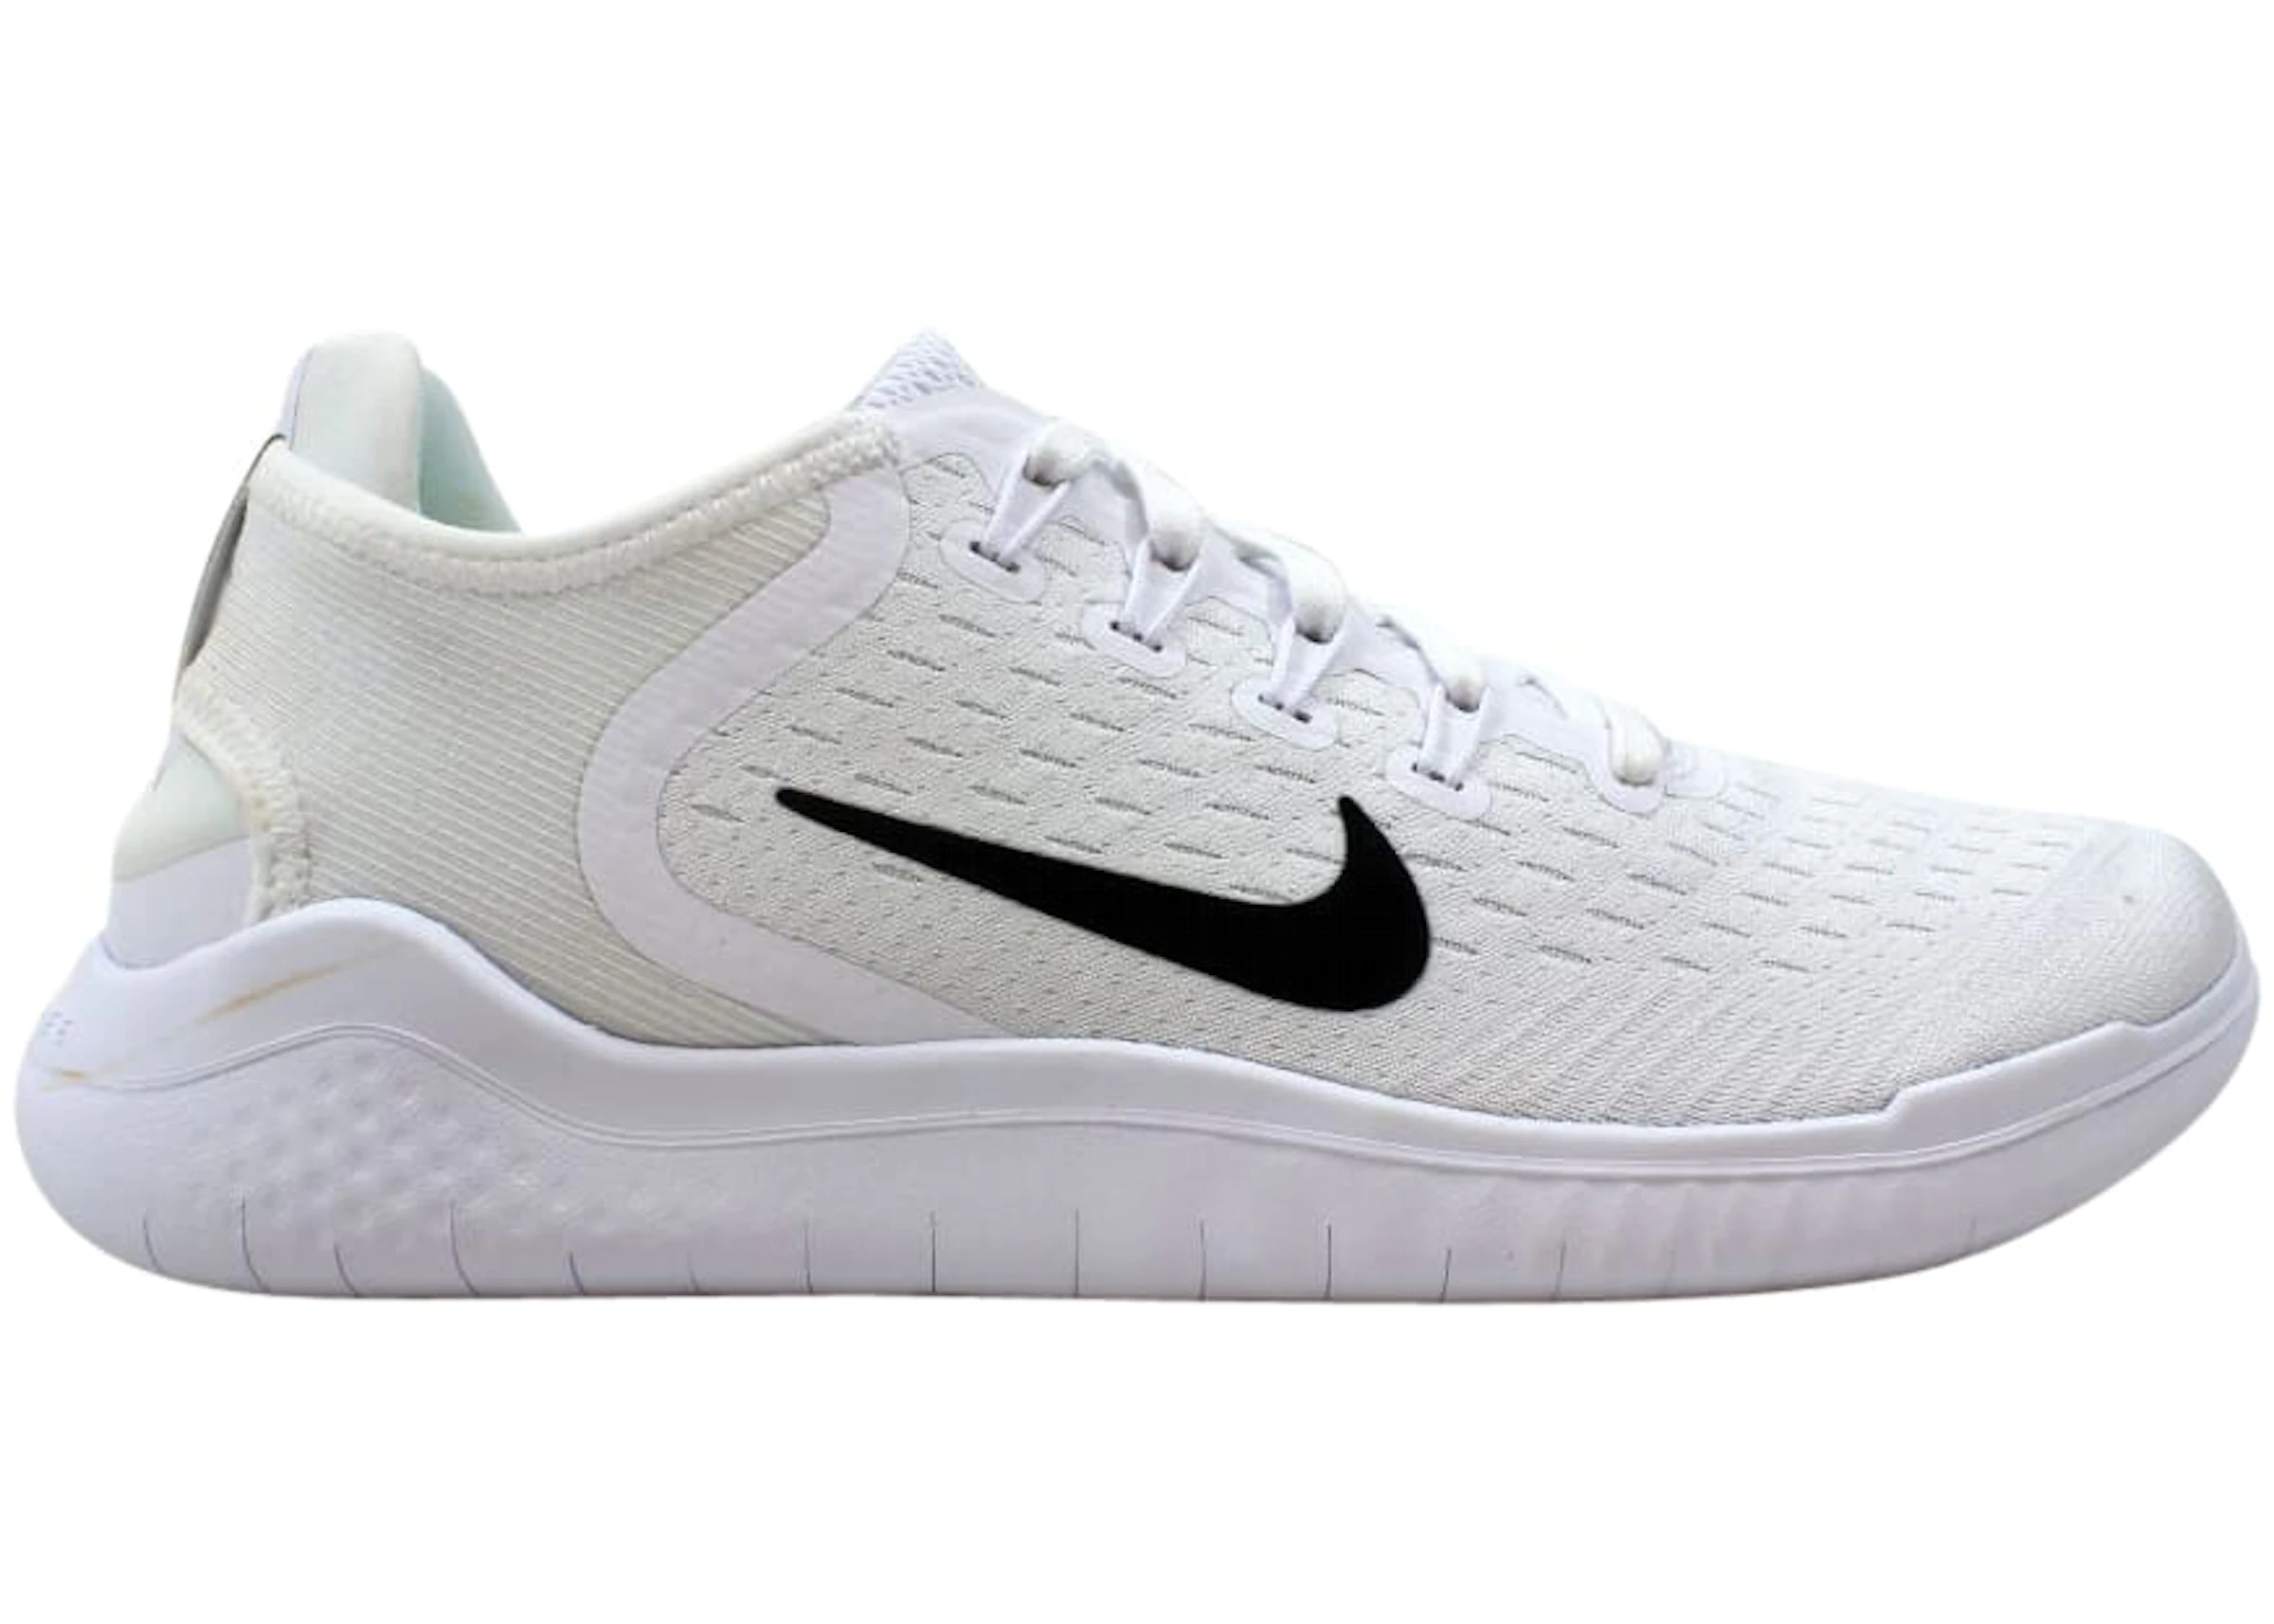 partition Hula hoop Explosives Nike Free RN 2018 White (W) - 942837-100 - US